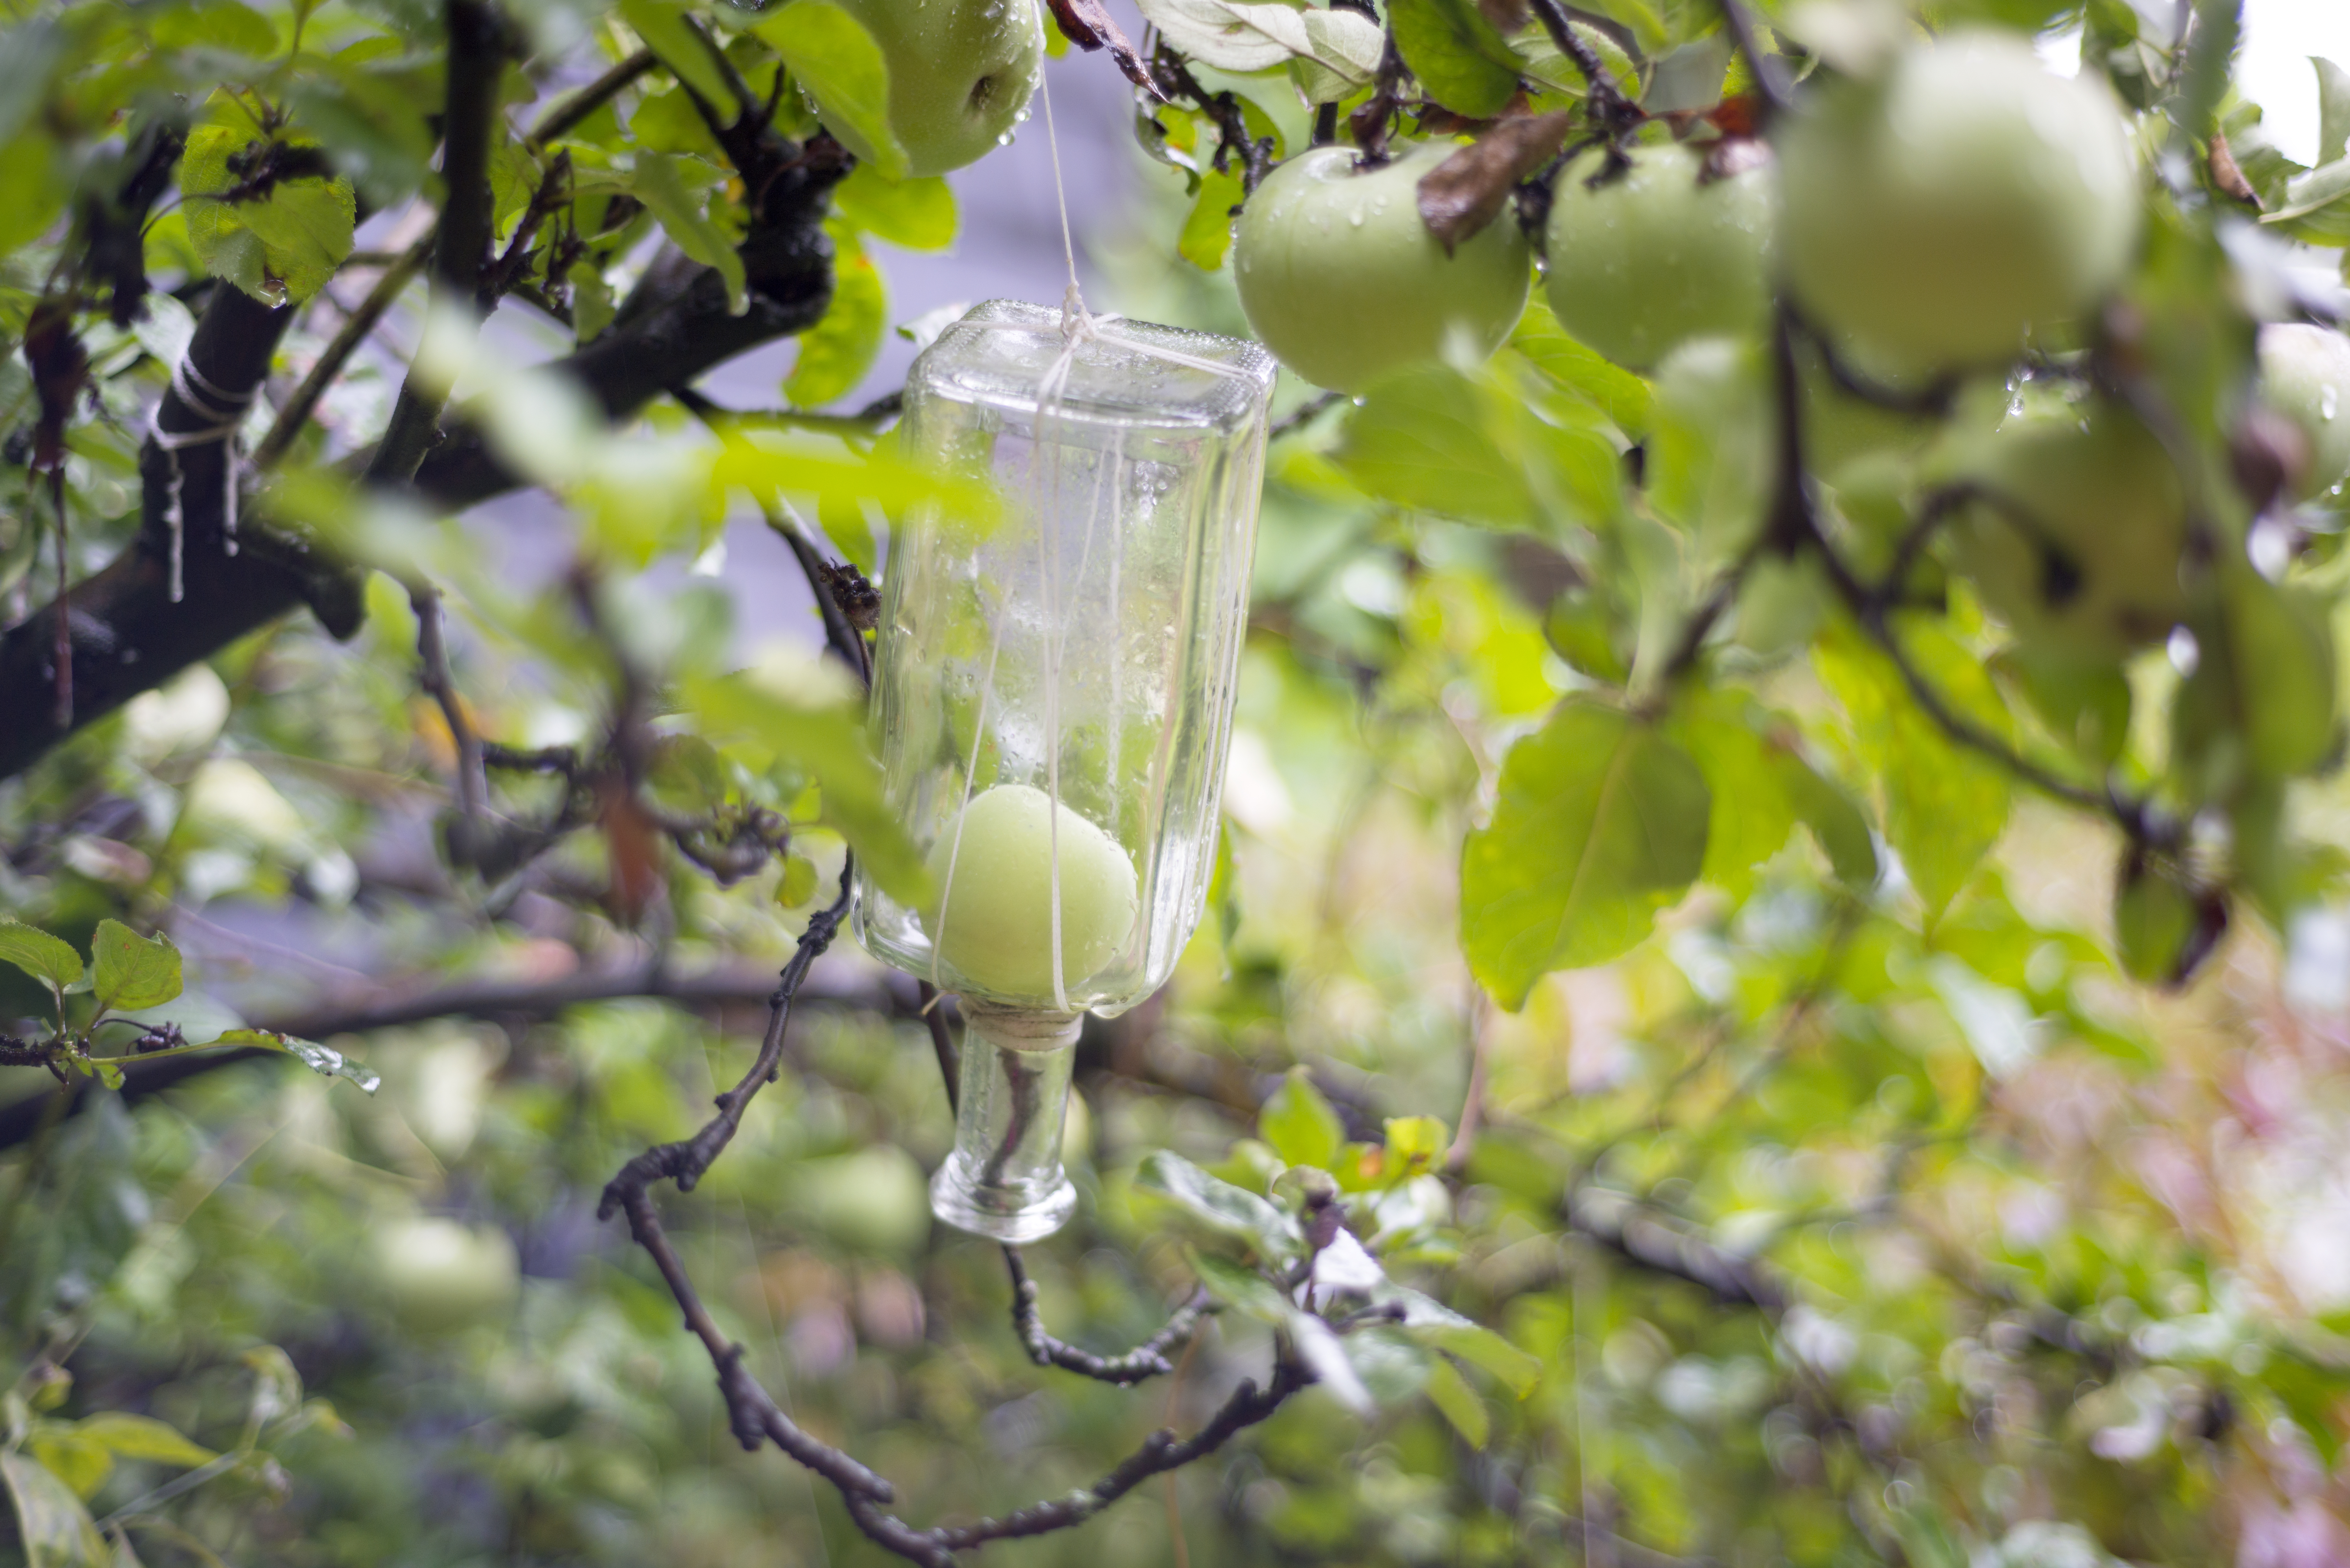 pear-growing-in-a-bottle-freshpoint-produce